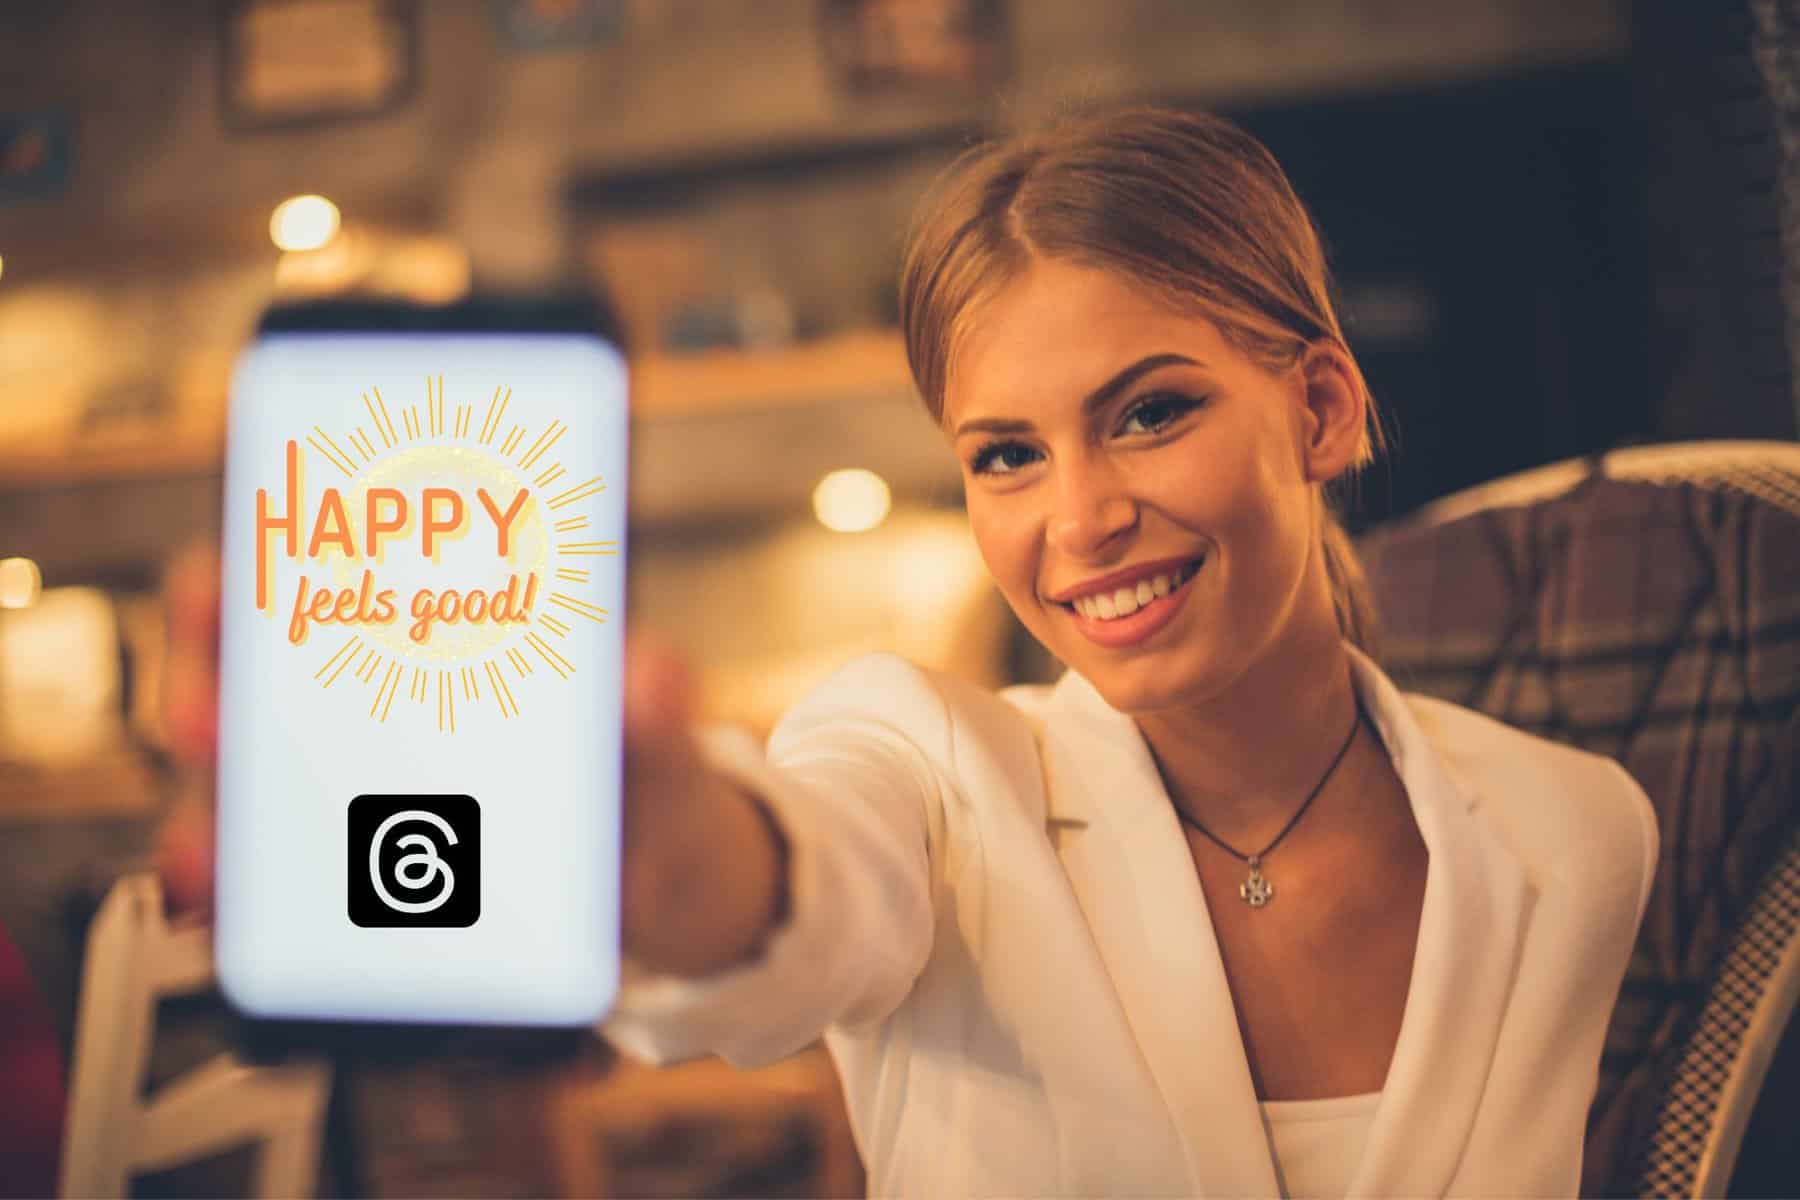 Smiling Young Woman Holding Phone Out. Screen Shows Happy Feels Good Is Tied Up With Threads Logo.